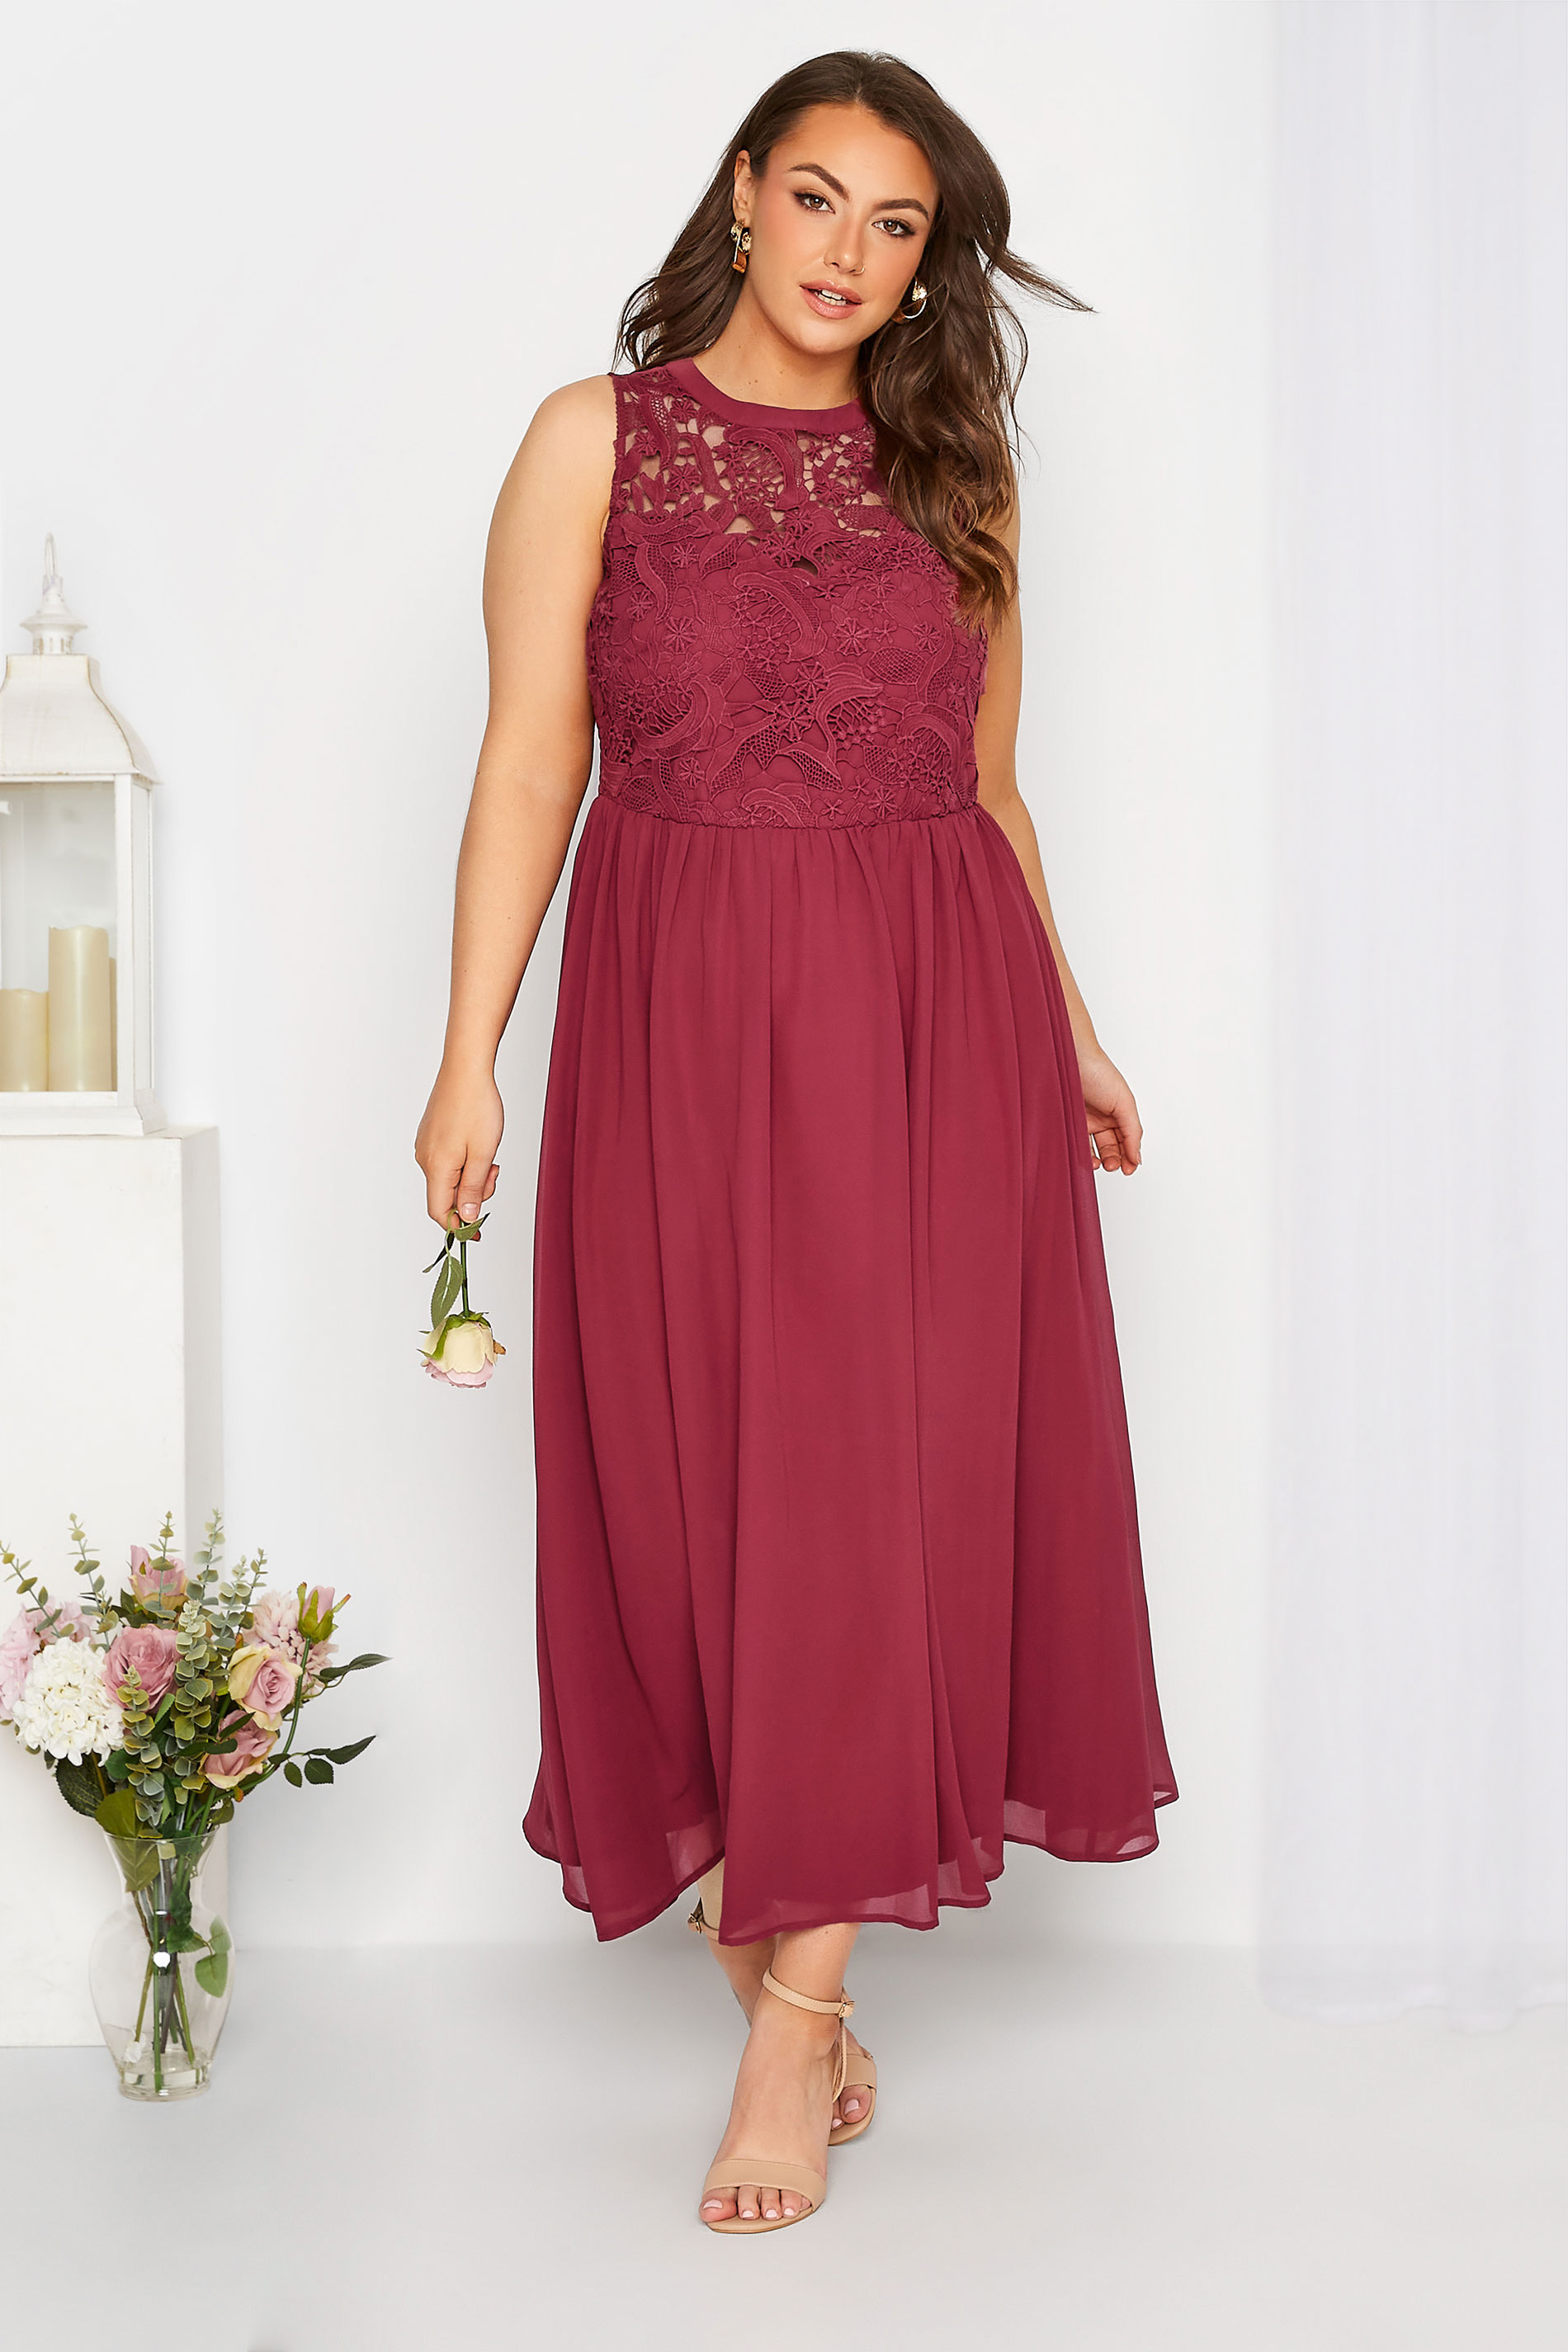 YOURS LONDON Curve Red Lace Front Chiffon Maxi Bridesmaid Dress 1